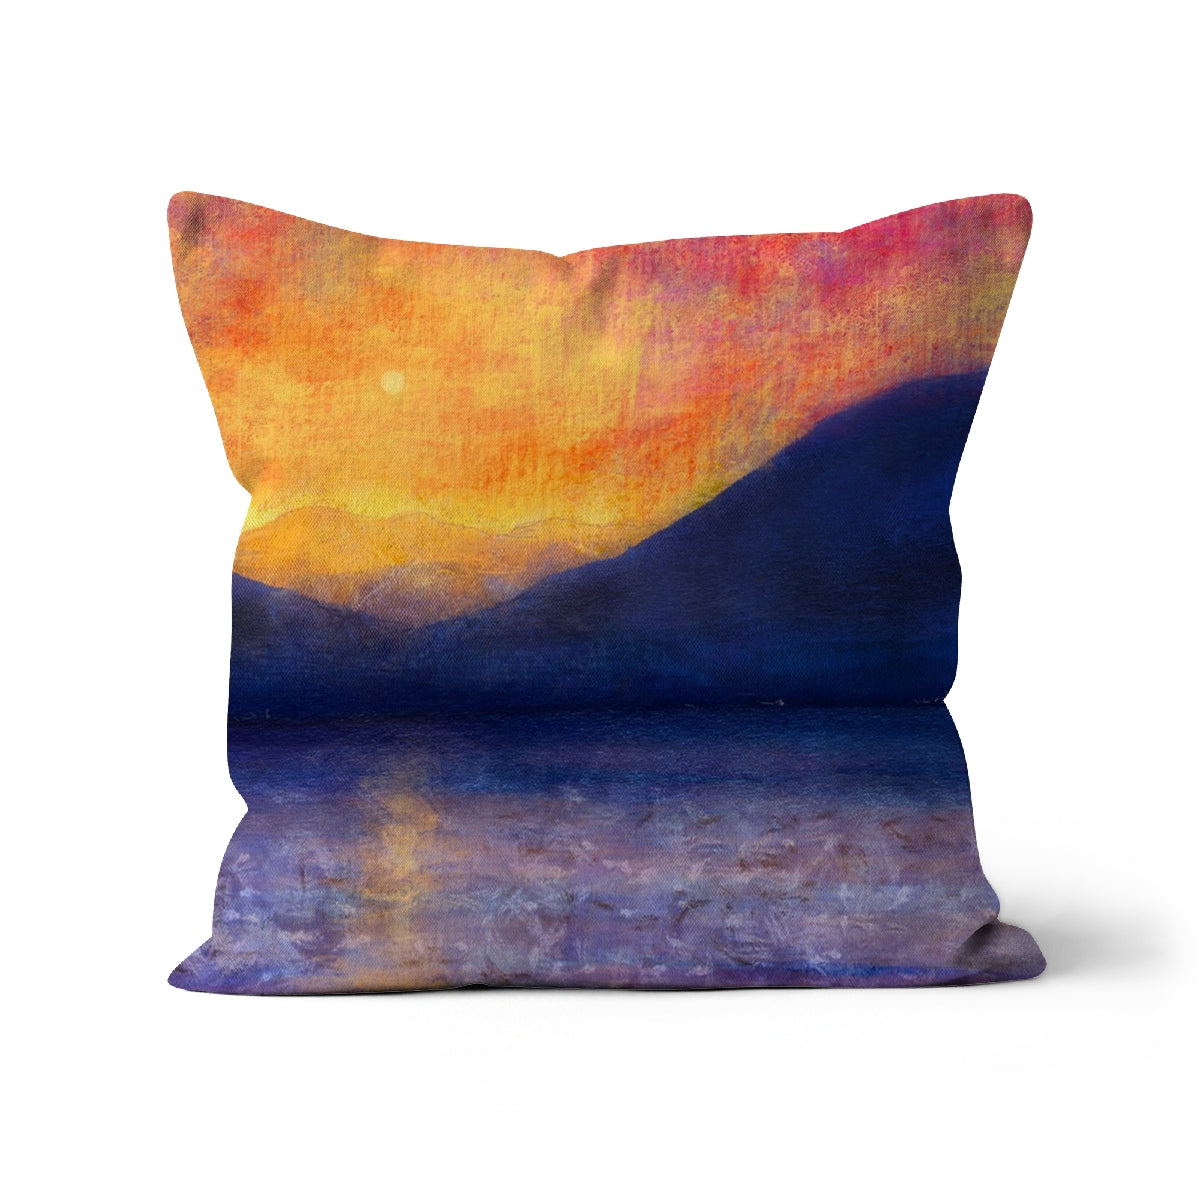 Sunset Approaching Mull Art Gifts Cushion-Cushions-Hebridean Islands Art Gallery-Faux Suede-16"x16"-Paintings, Prints, Homeware, Art Gifts From Scotland By Scottish Artist Kevin Hunter